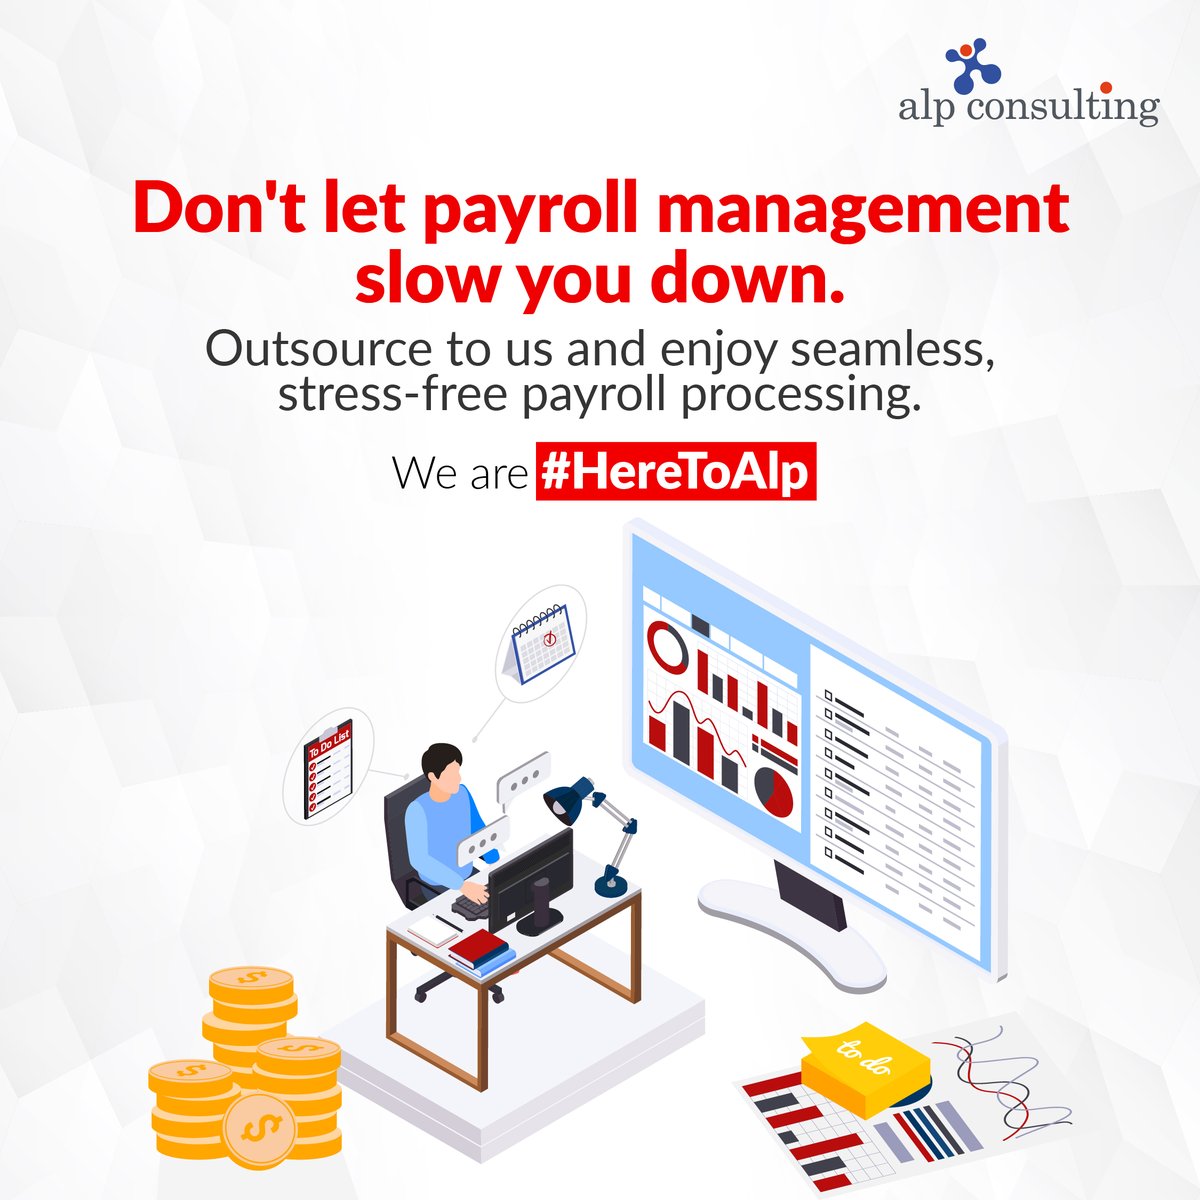 Outsource to us today and experience the freedom of worry-free payroll management. Your success is our priority.

Get in touch with us today -

 #BusinessGrowth #PayrollManagement #Payroll #Salary #TaxCalculations #Technology #Finance #Management #PayrollOutsourcing #Staffing